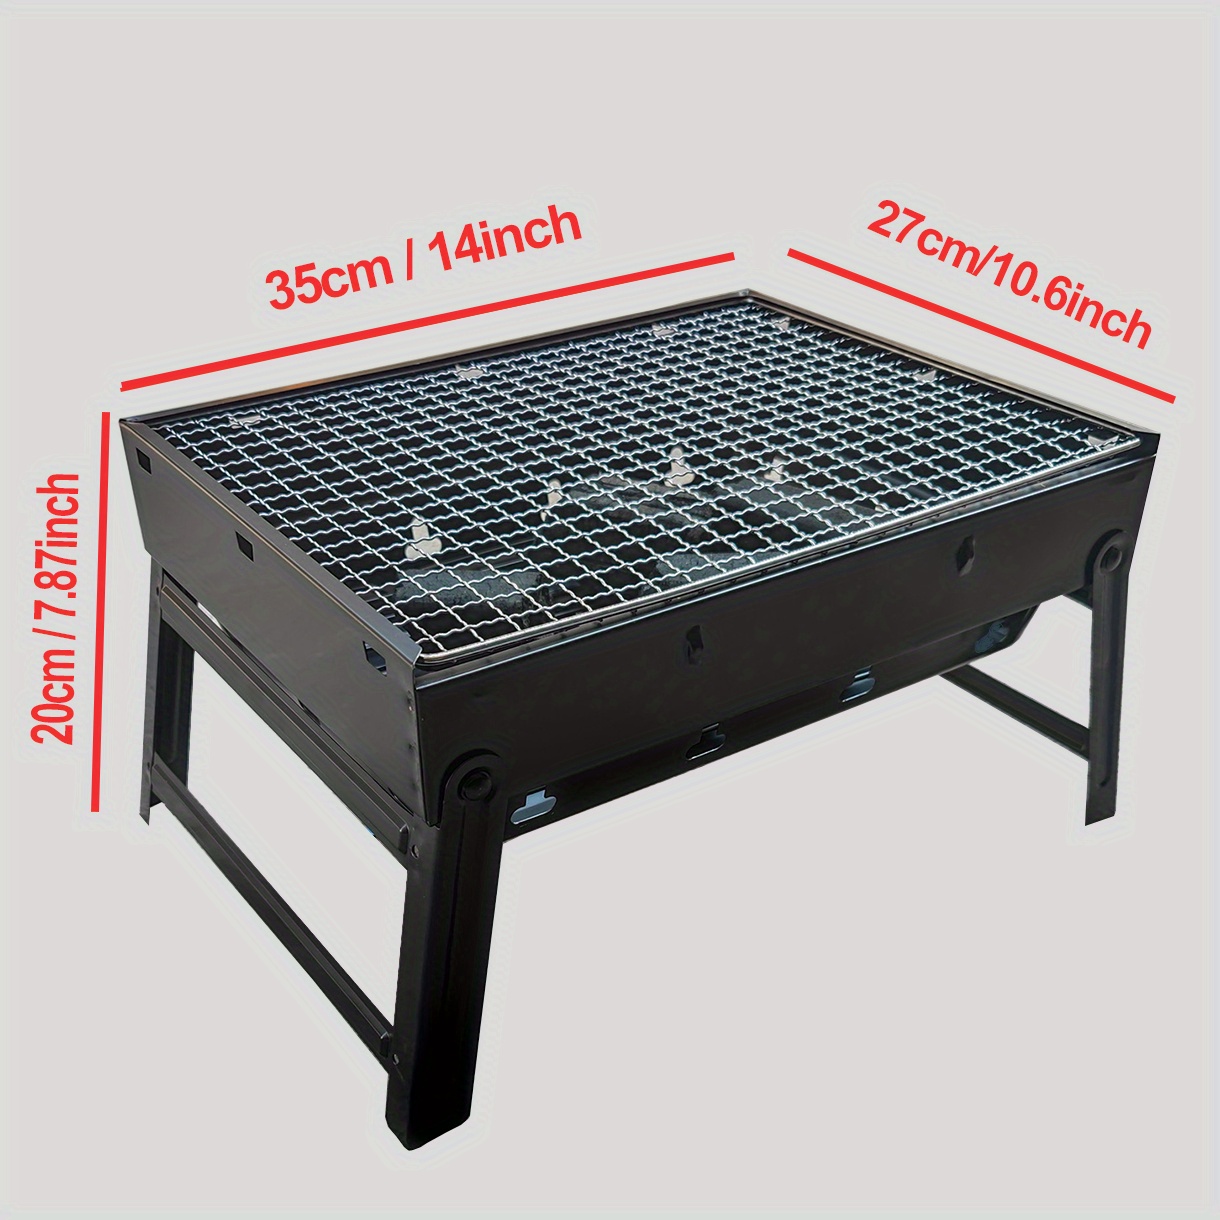 Portable, Foldable BBQ Grill: Perfect for Outdoor Camping, Picnics, and  More!